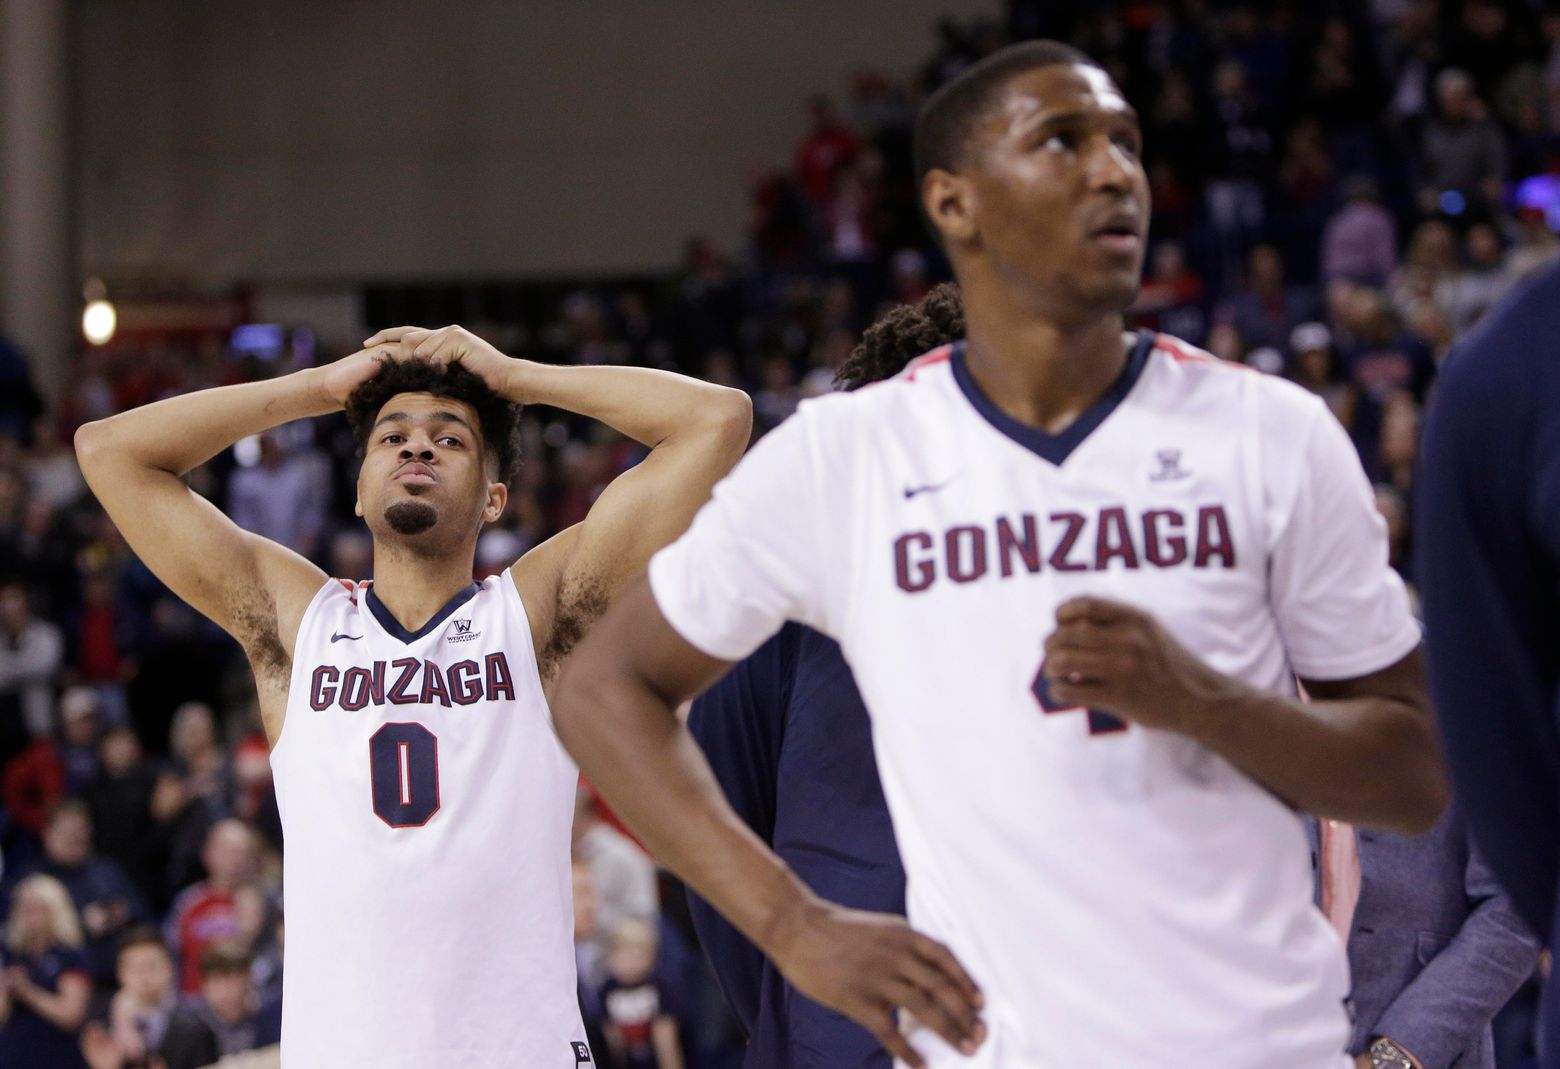 Nobody's perfect: No. 1 Gonzaga men lose at home to Brigham ... - The Seattle Times